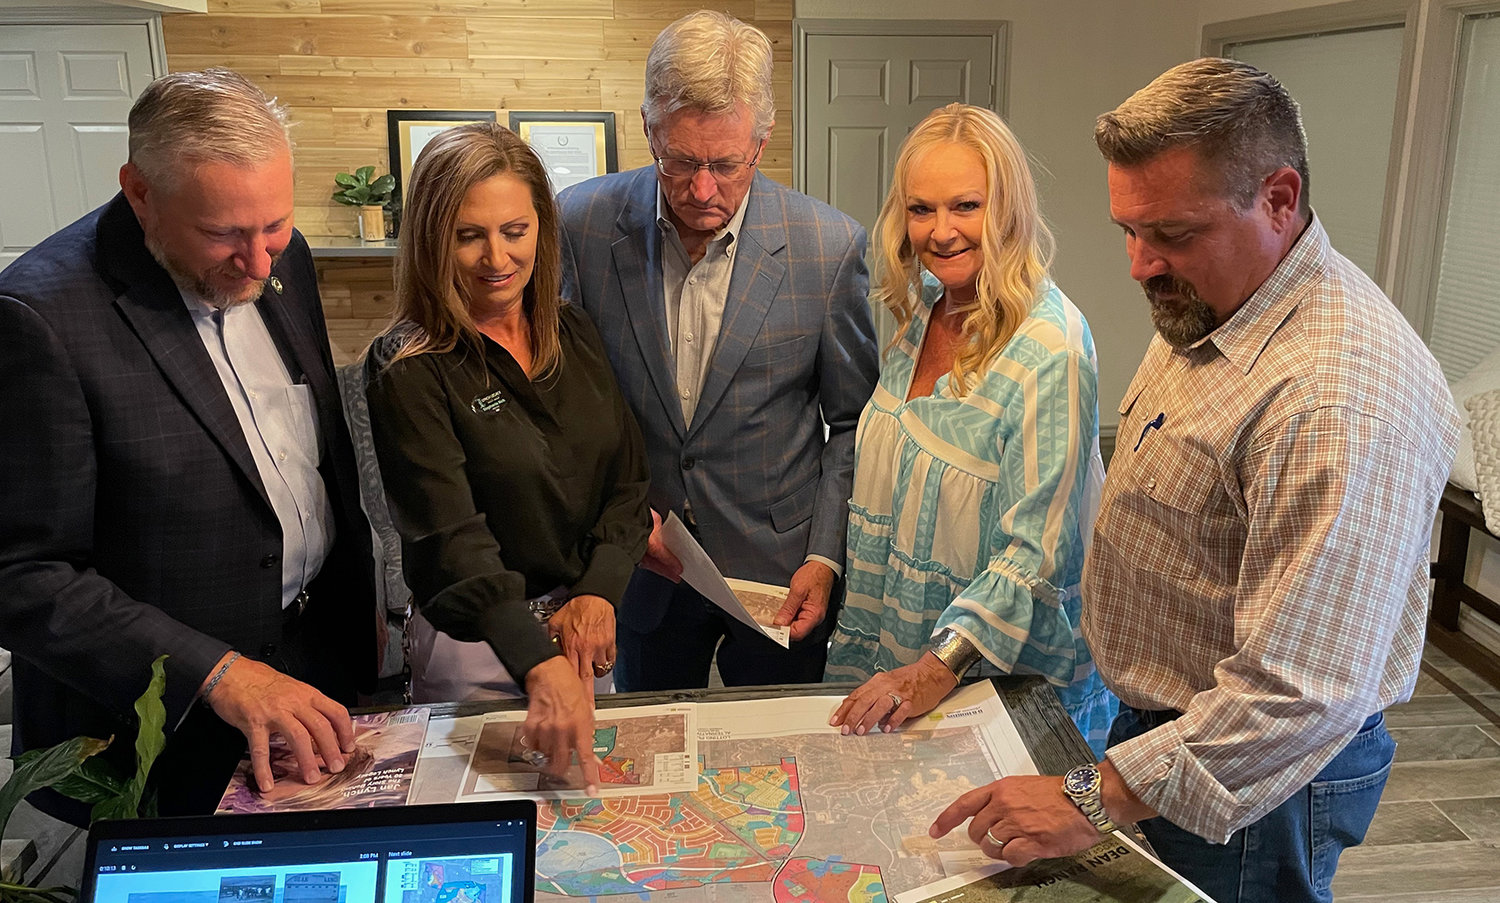 State Senator Drew Springer, Stephanie Rich, State Representative Glenn Rogers, Stacy Lynch, and County Commissioner-elect Mike Hale look over a layout of the plans for the Dean Ranch property.